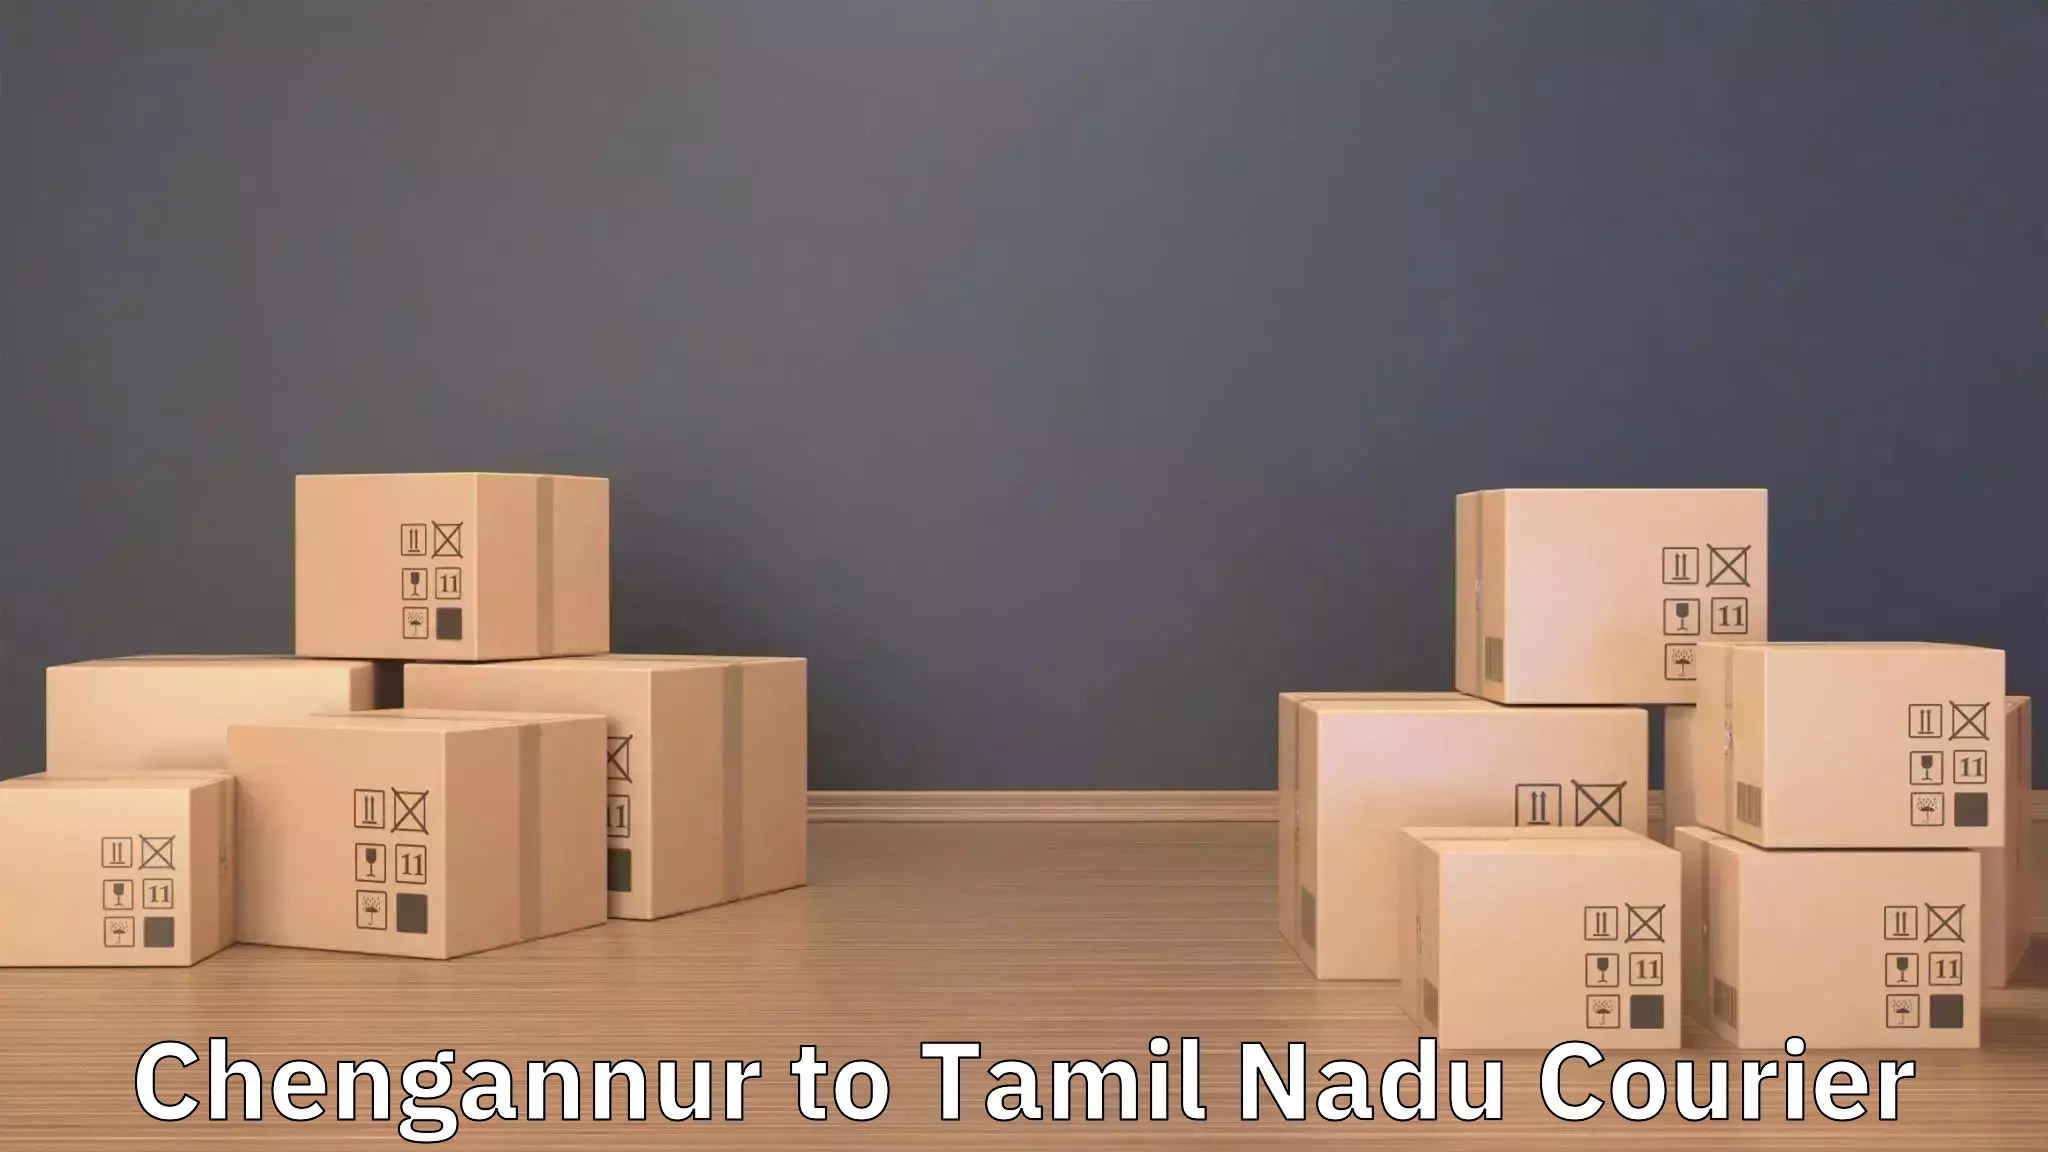 Affordable moving solutions Chengannur to Eraiyur